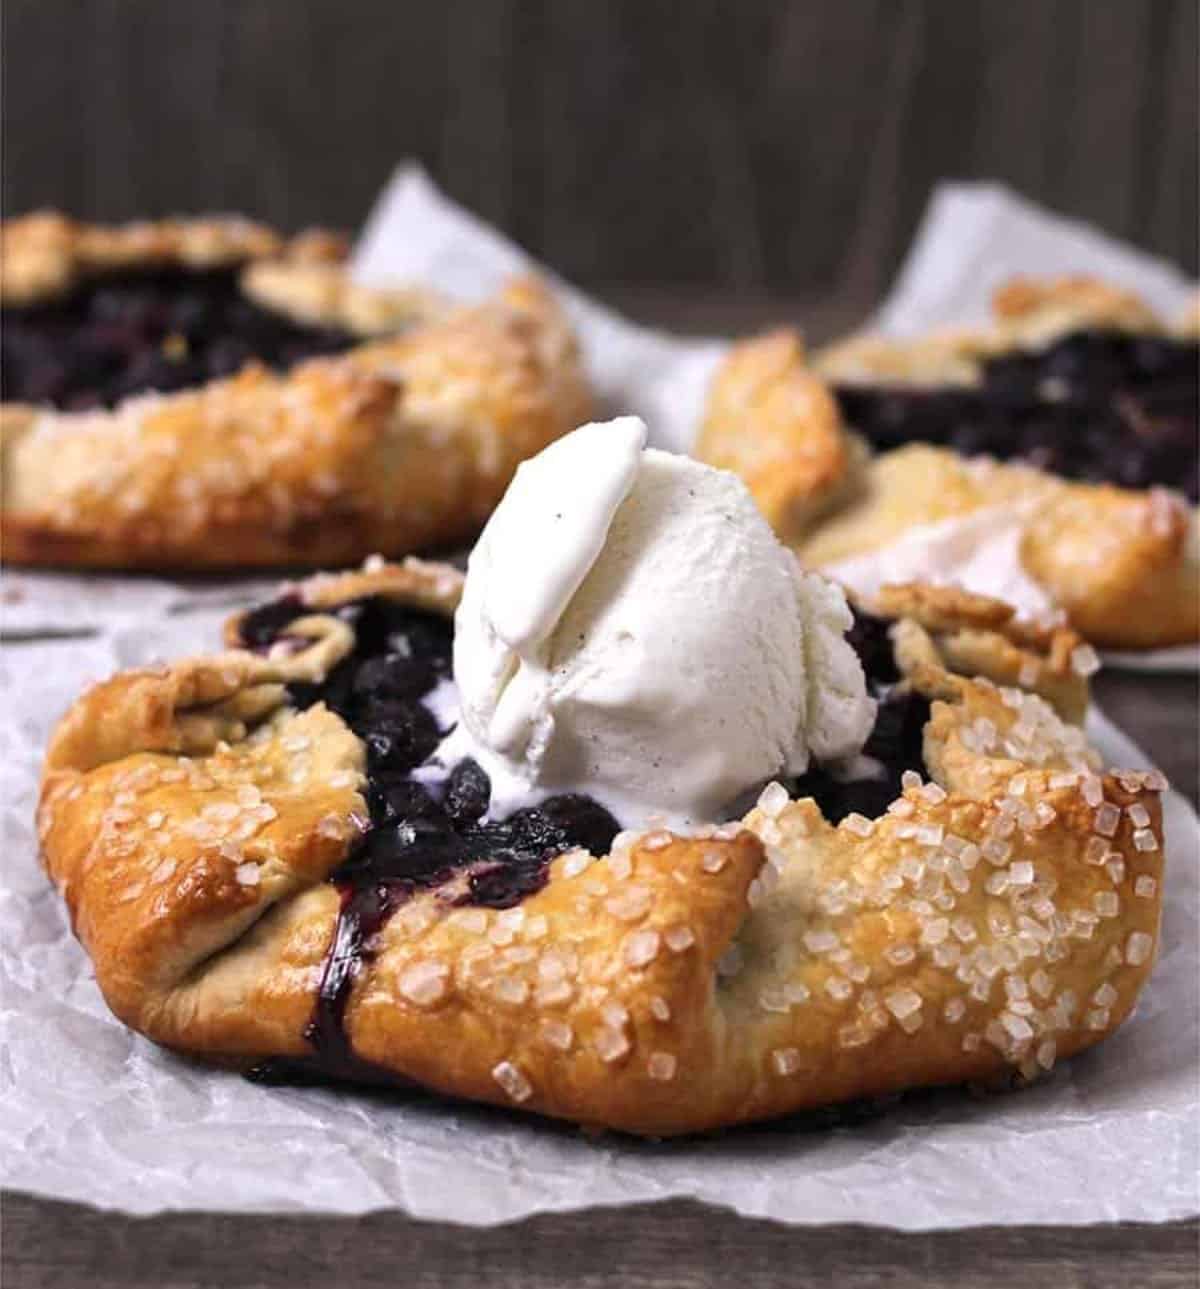 Side view of must-try blueberry galettes or crostatas on white parchment paper topped with a scoop of ice cream.